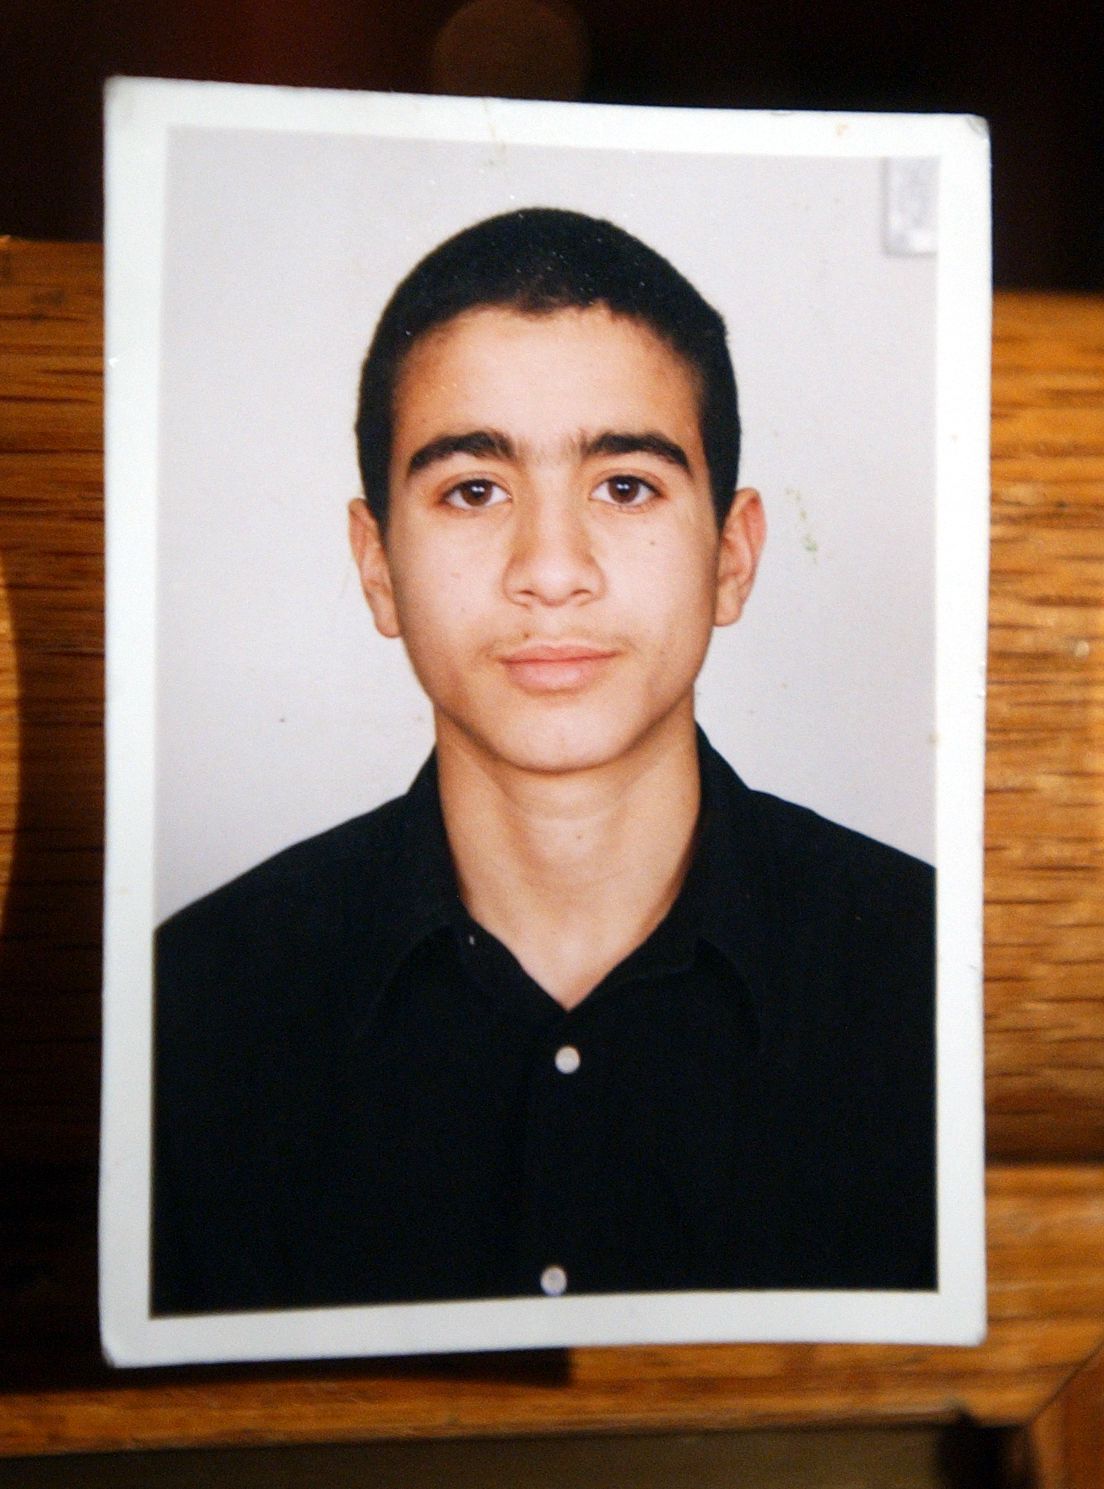 Omar Khadr in 2005, when he was 18 years old (Rick Eglinton/Toronto Star via Getty Images)